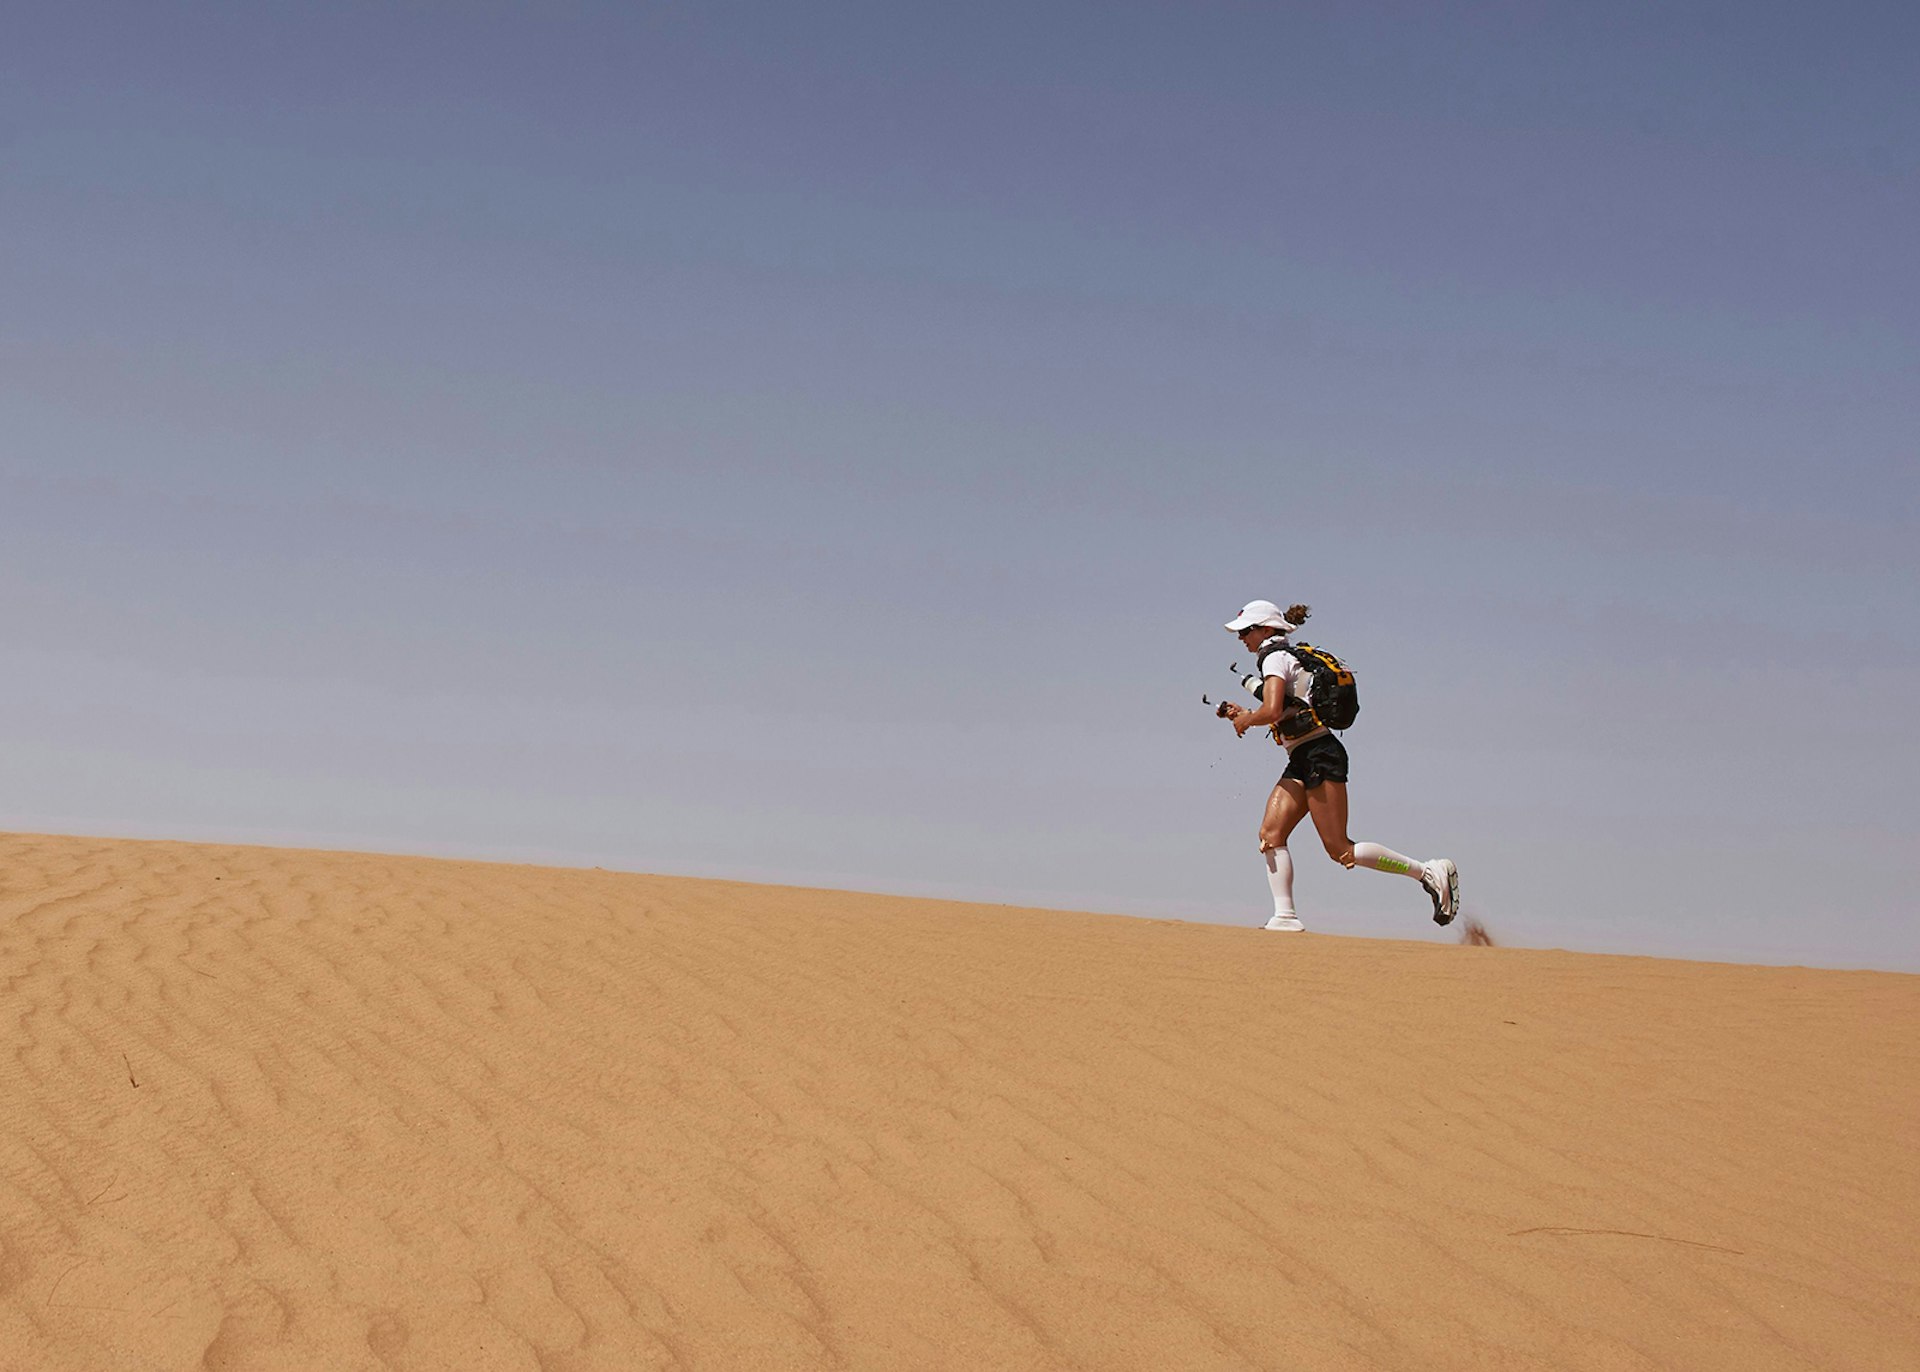 A competitor conquering a dune in the formidable Marathon des Sables, Morocco © Jean-Philippe Ksiazek / Getty Images